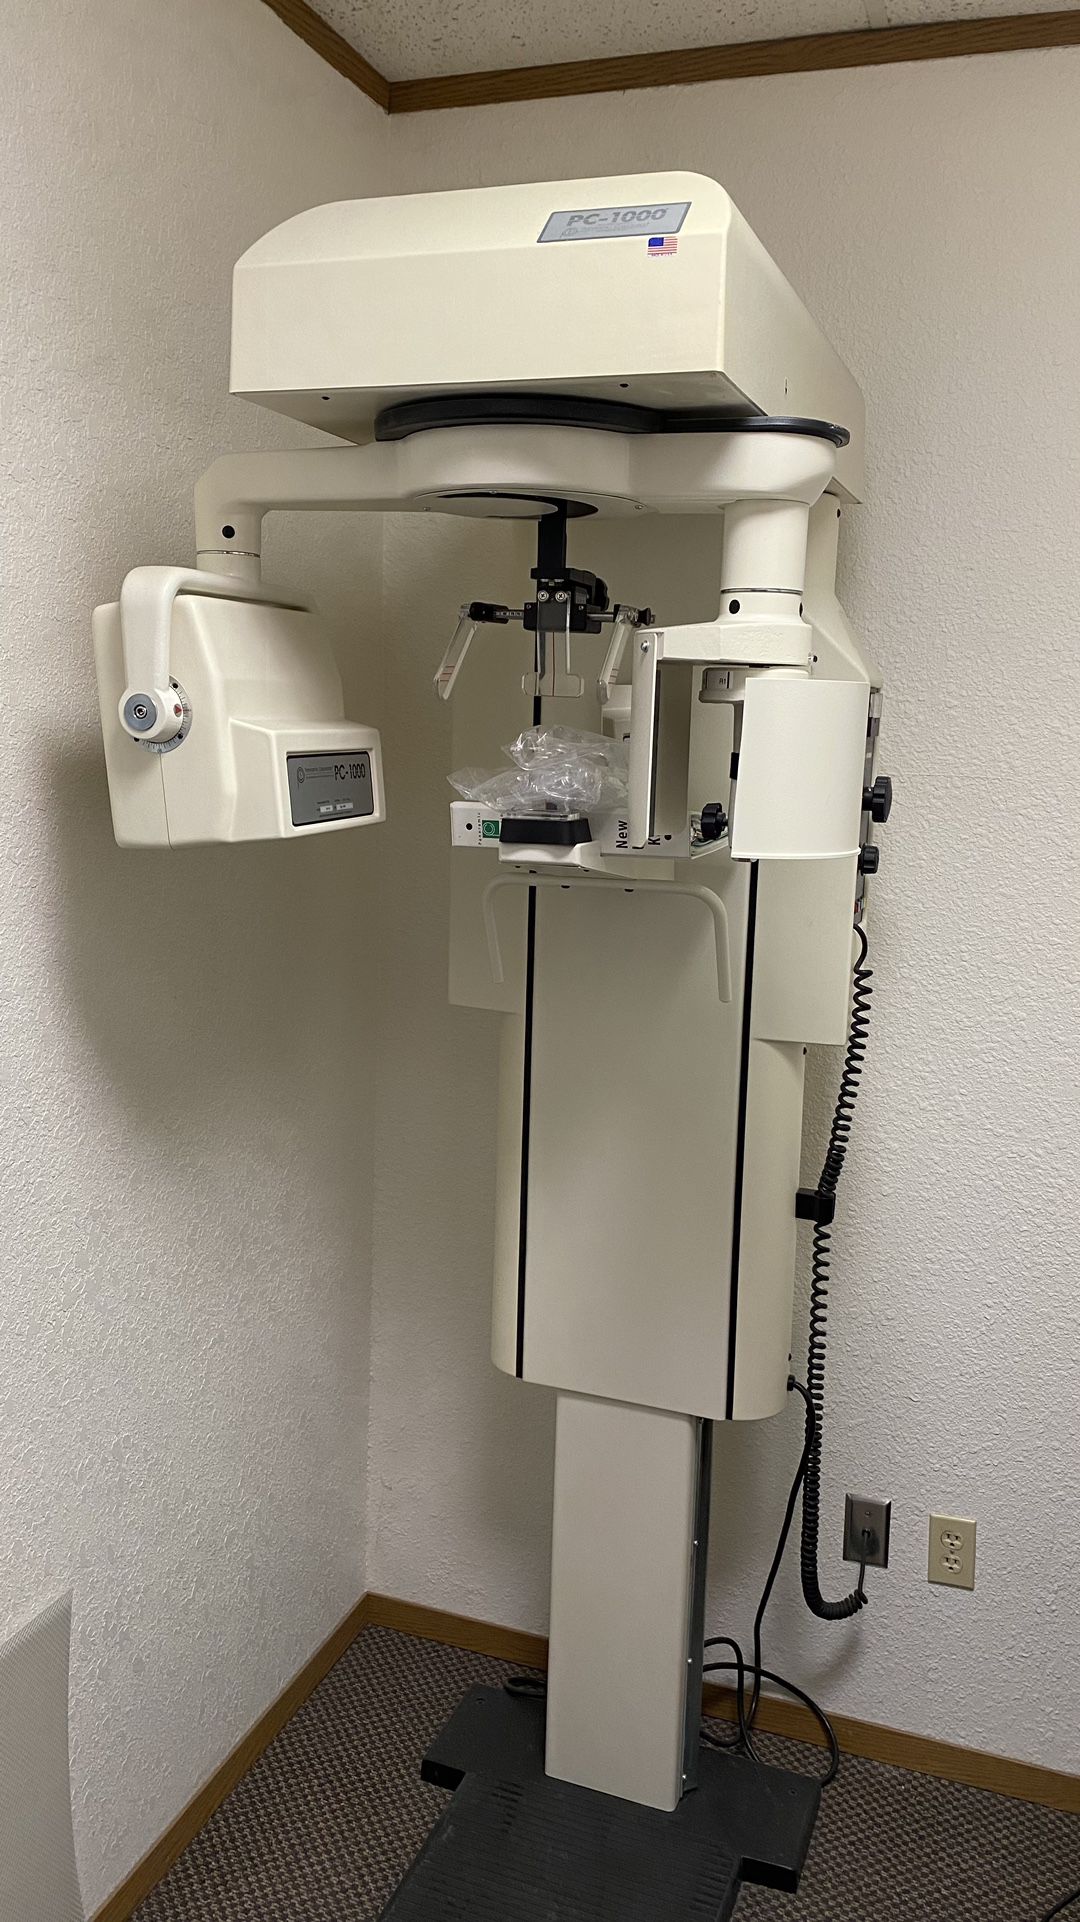 Dental Panoramic (Pano) X-Ray, PC1000 for Sale in Lacey, WA - OfferUp